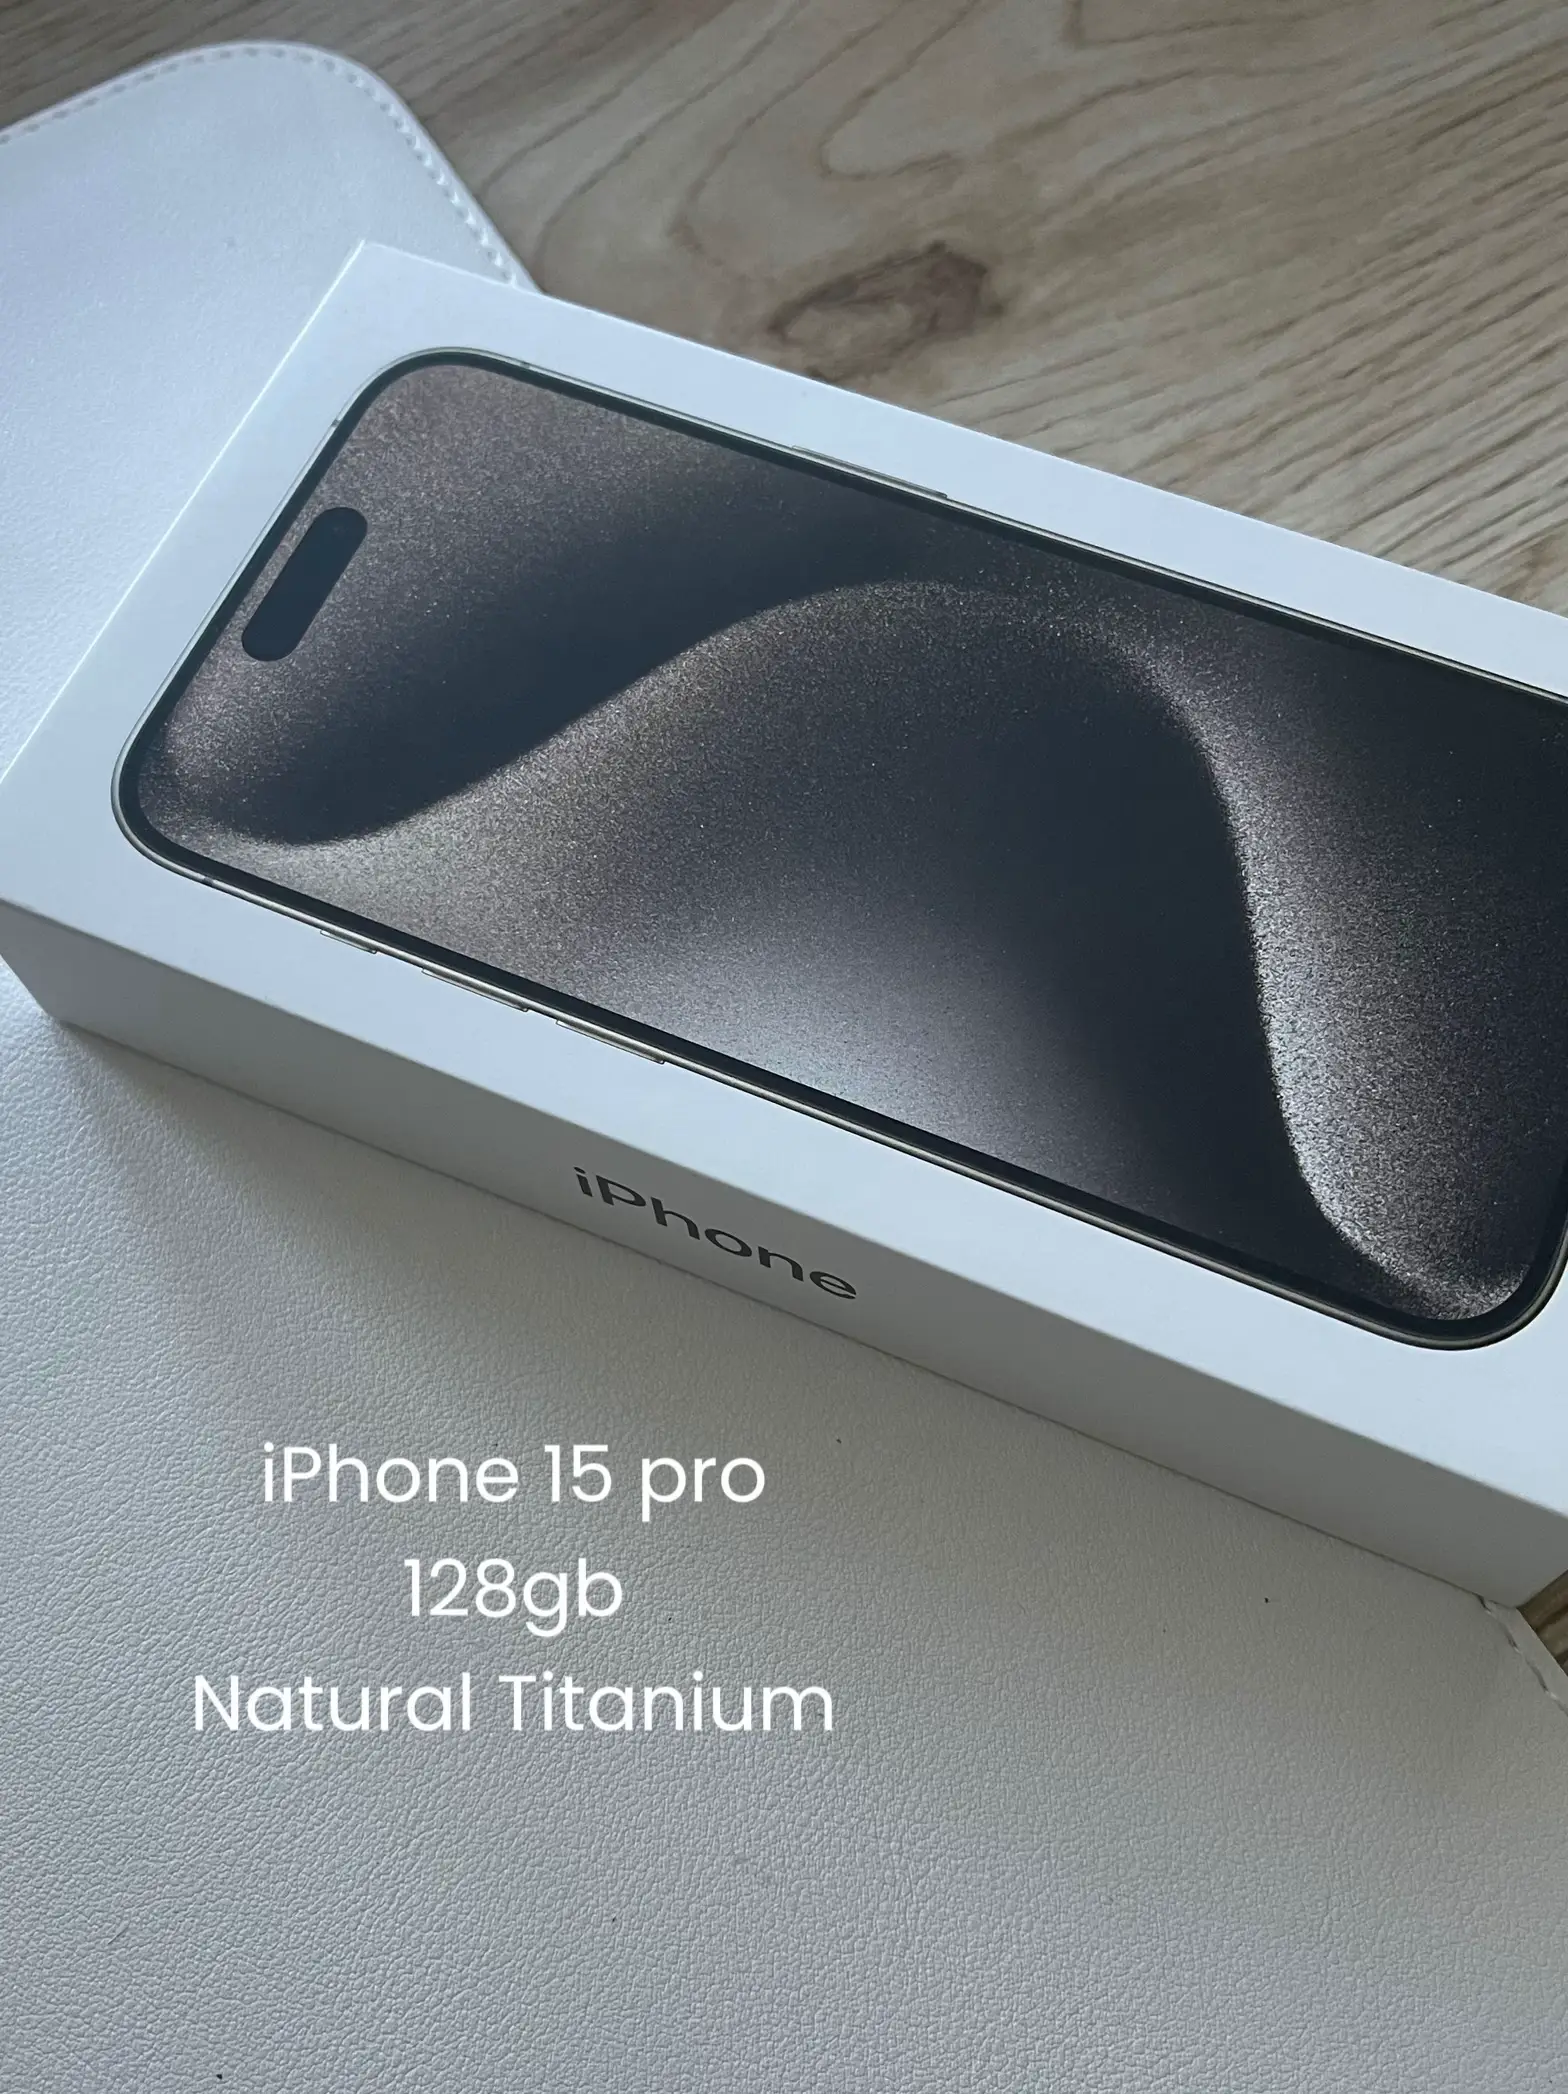 iPhone 15 pro 128gb Natural Titanium, Gallery posted by Ale☁️✨🎀